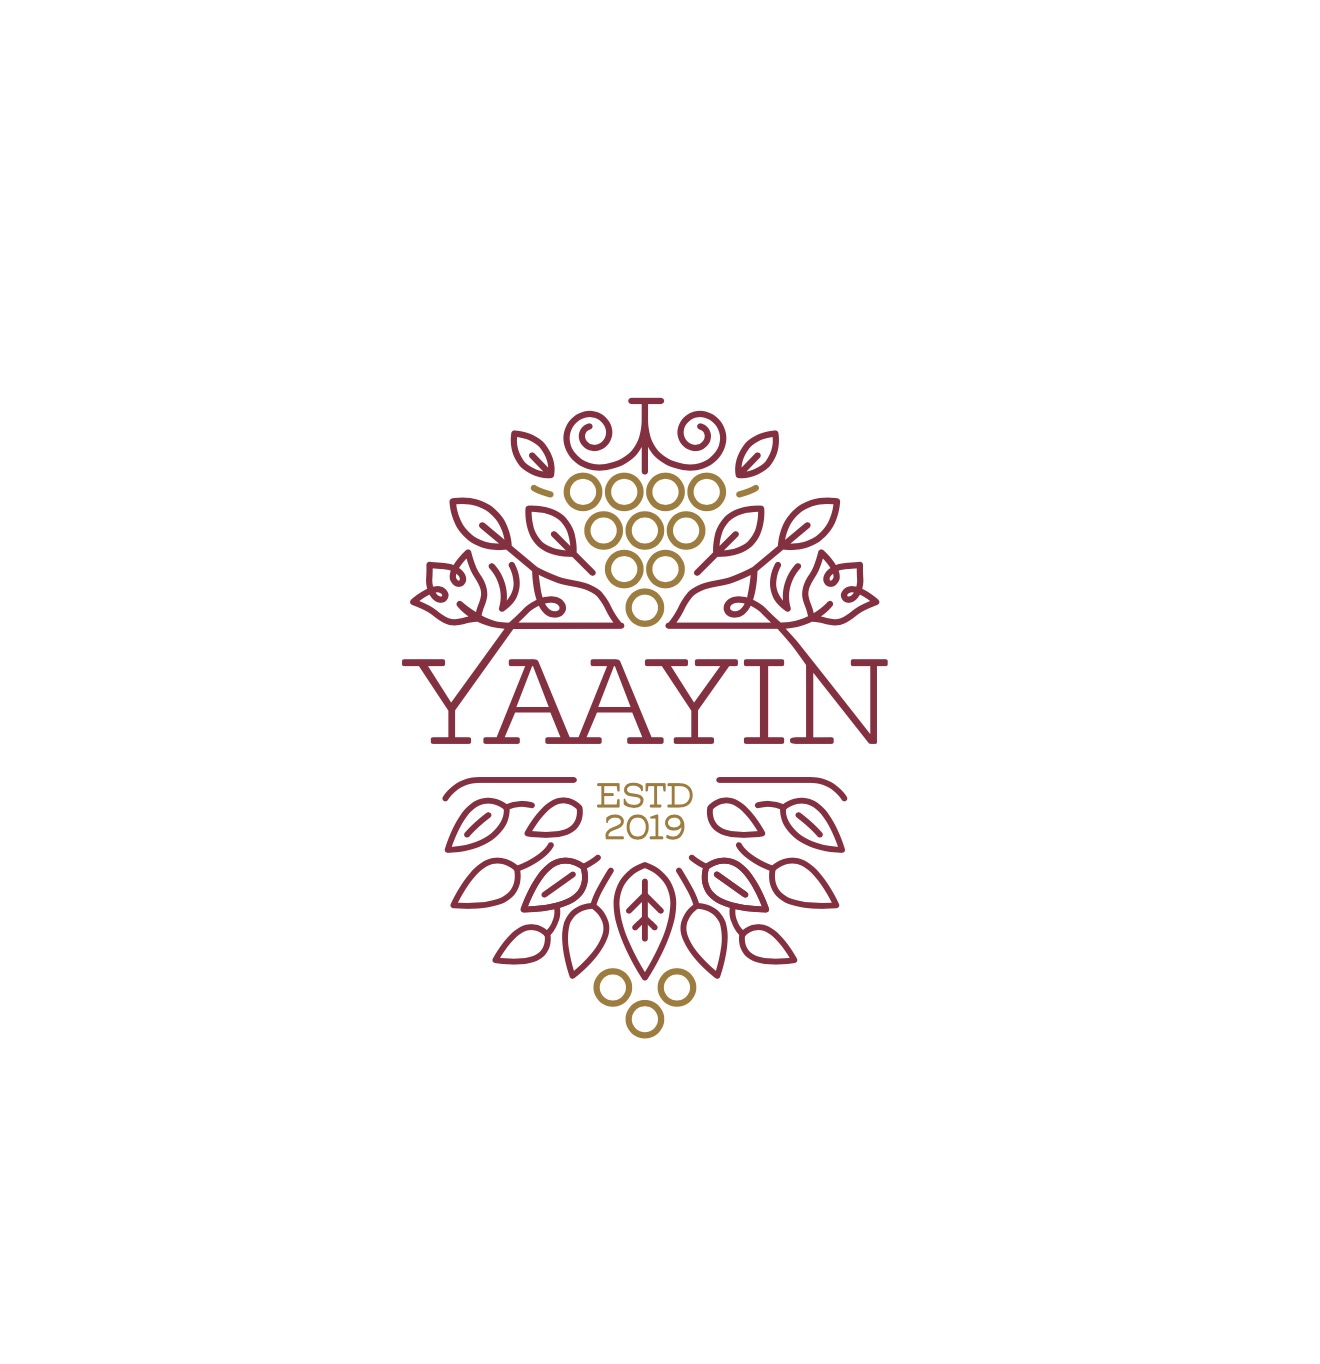 Yaayin logo, the word Yaayin is surrounded by linear grapes.